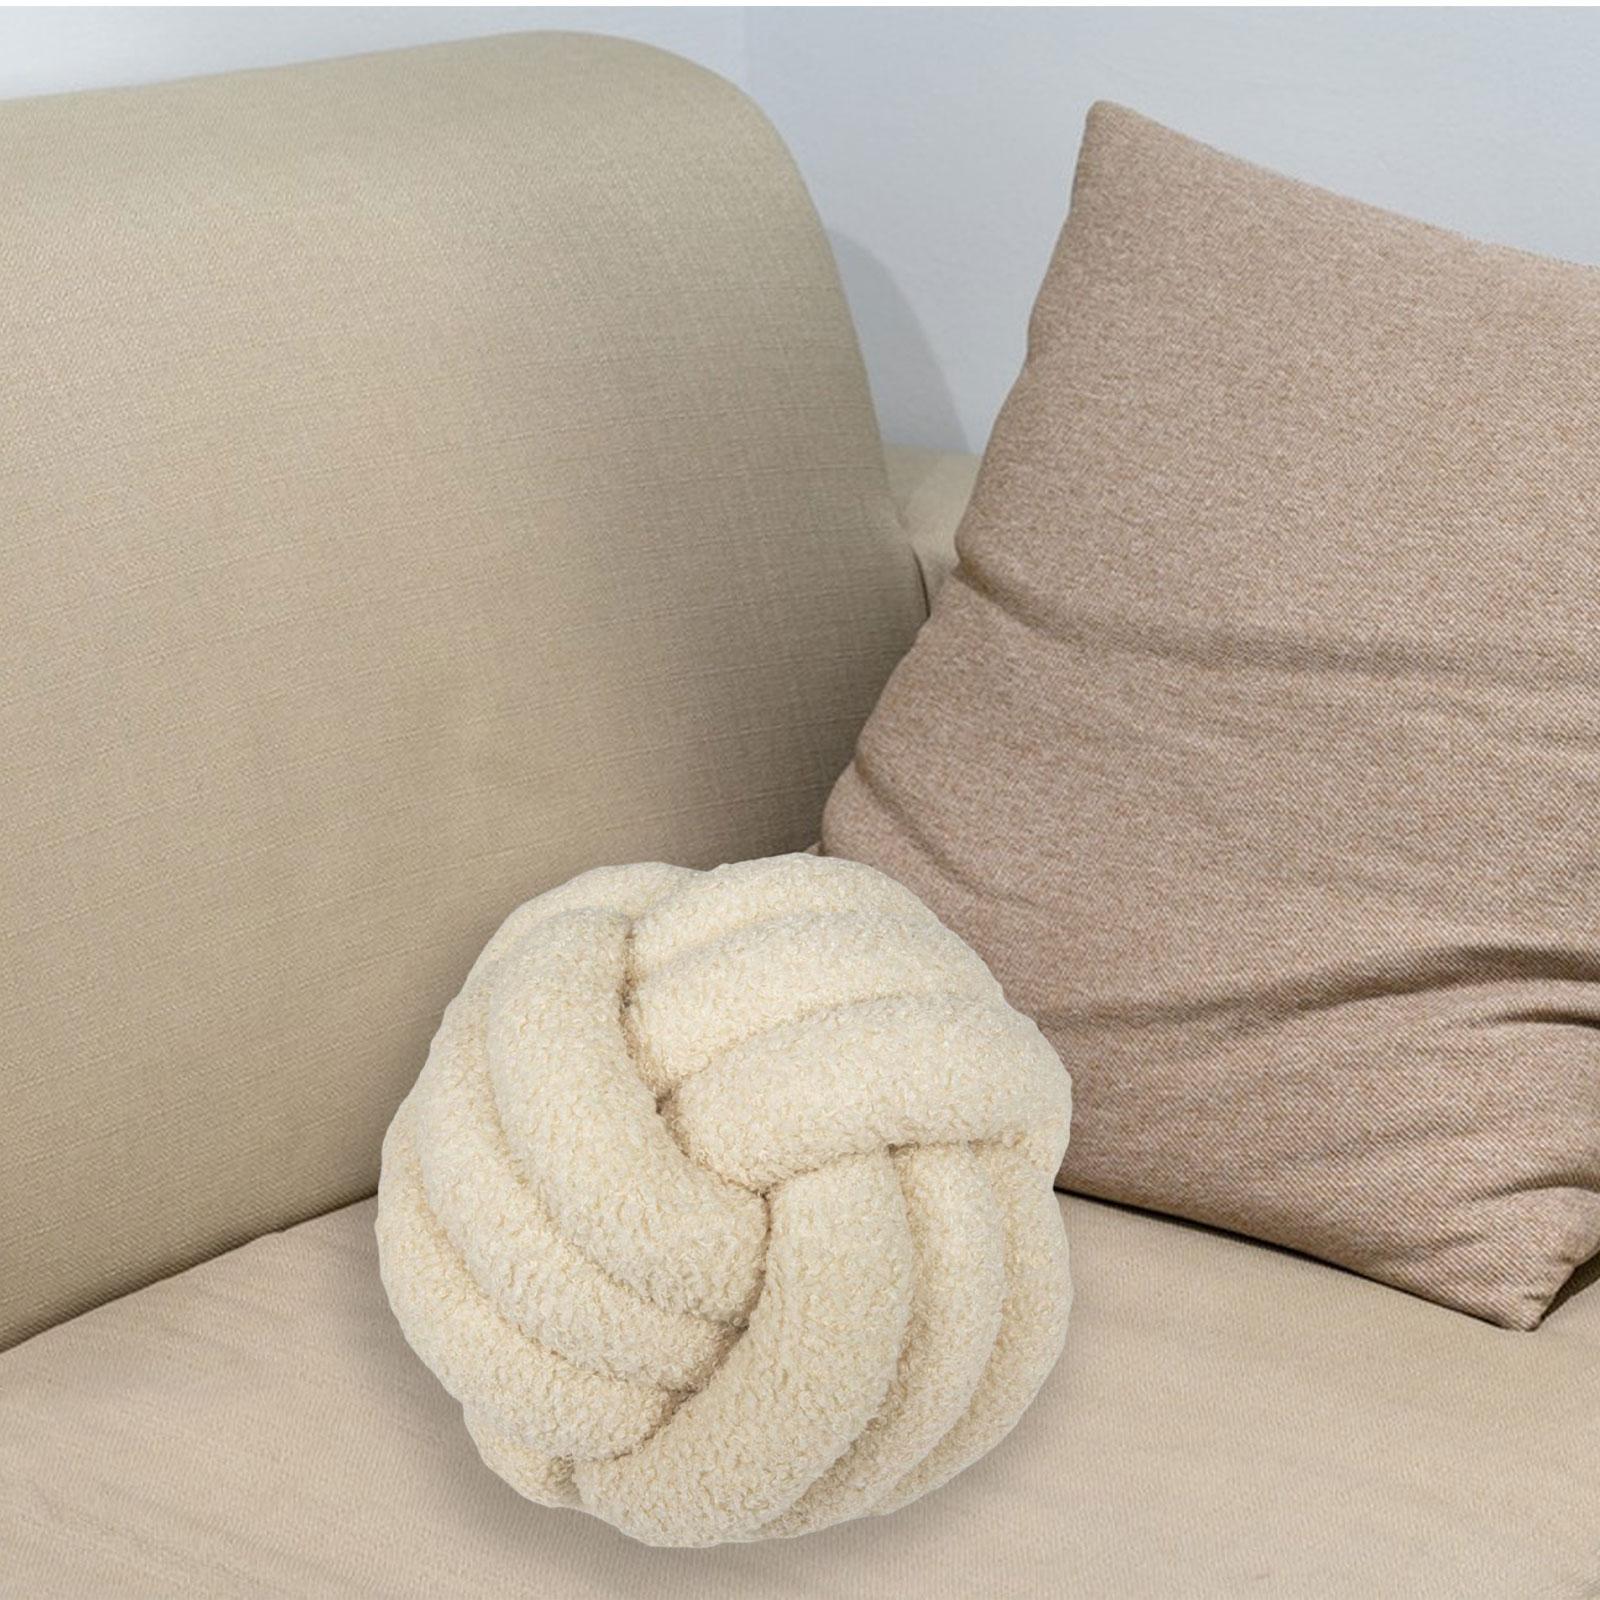 Plush Knot Ball Pillow Diameter 22cm Room Decoration for sofa Couch Beige